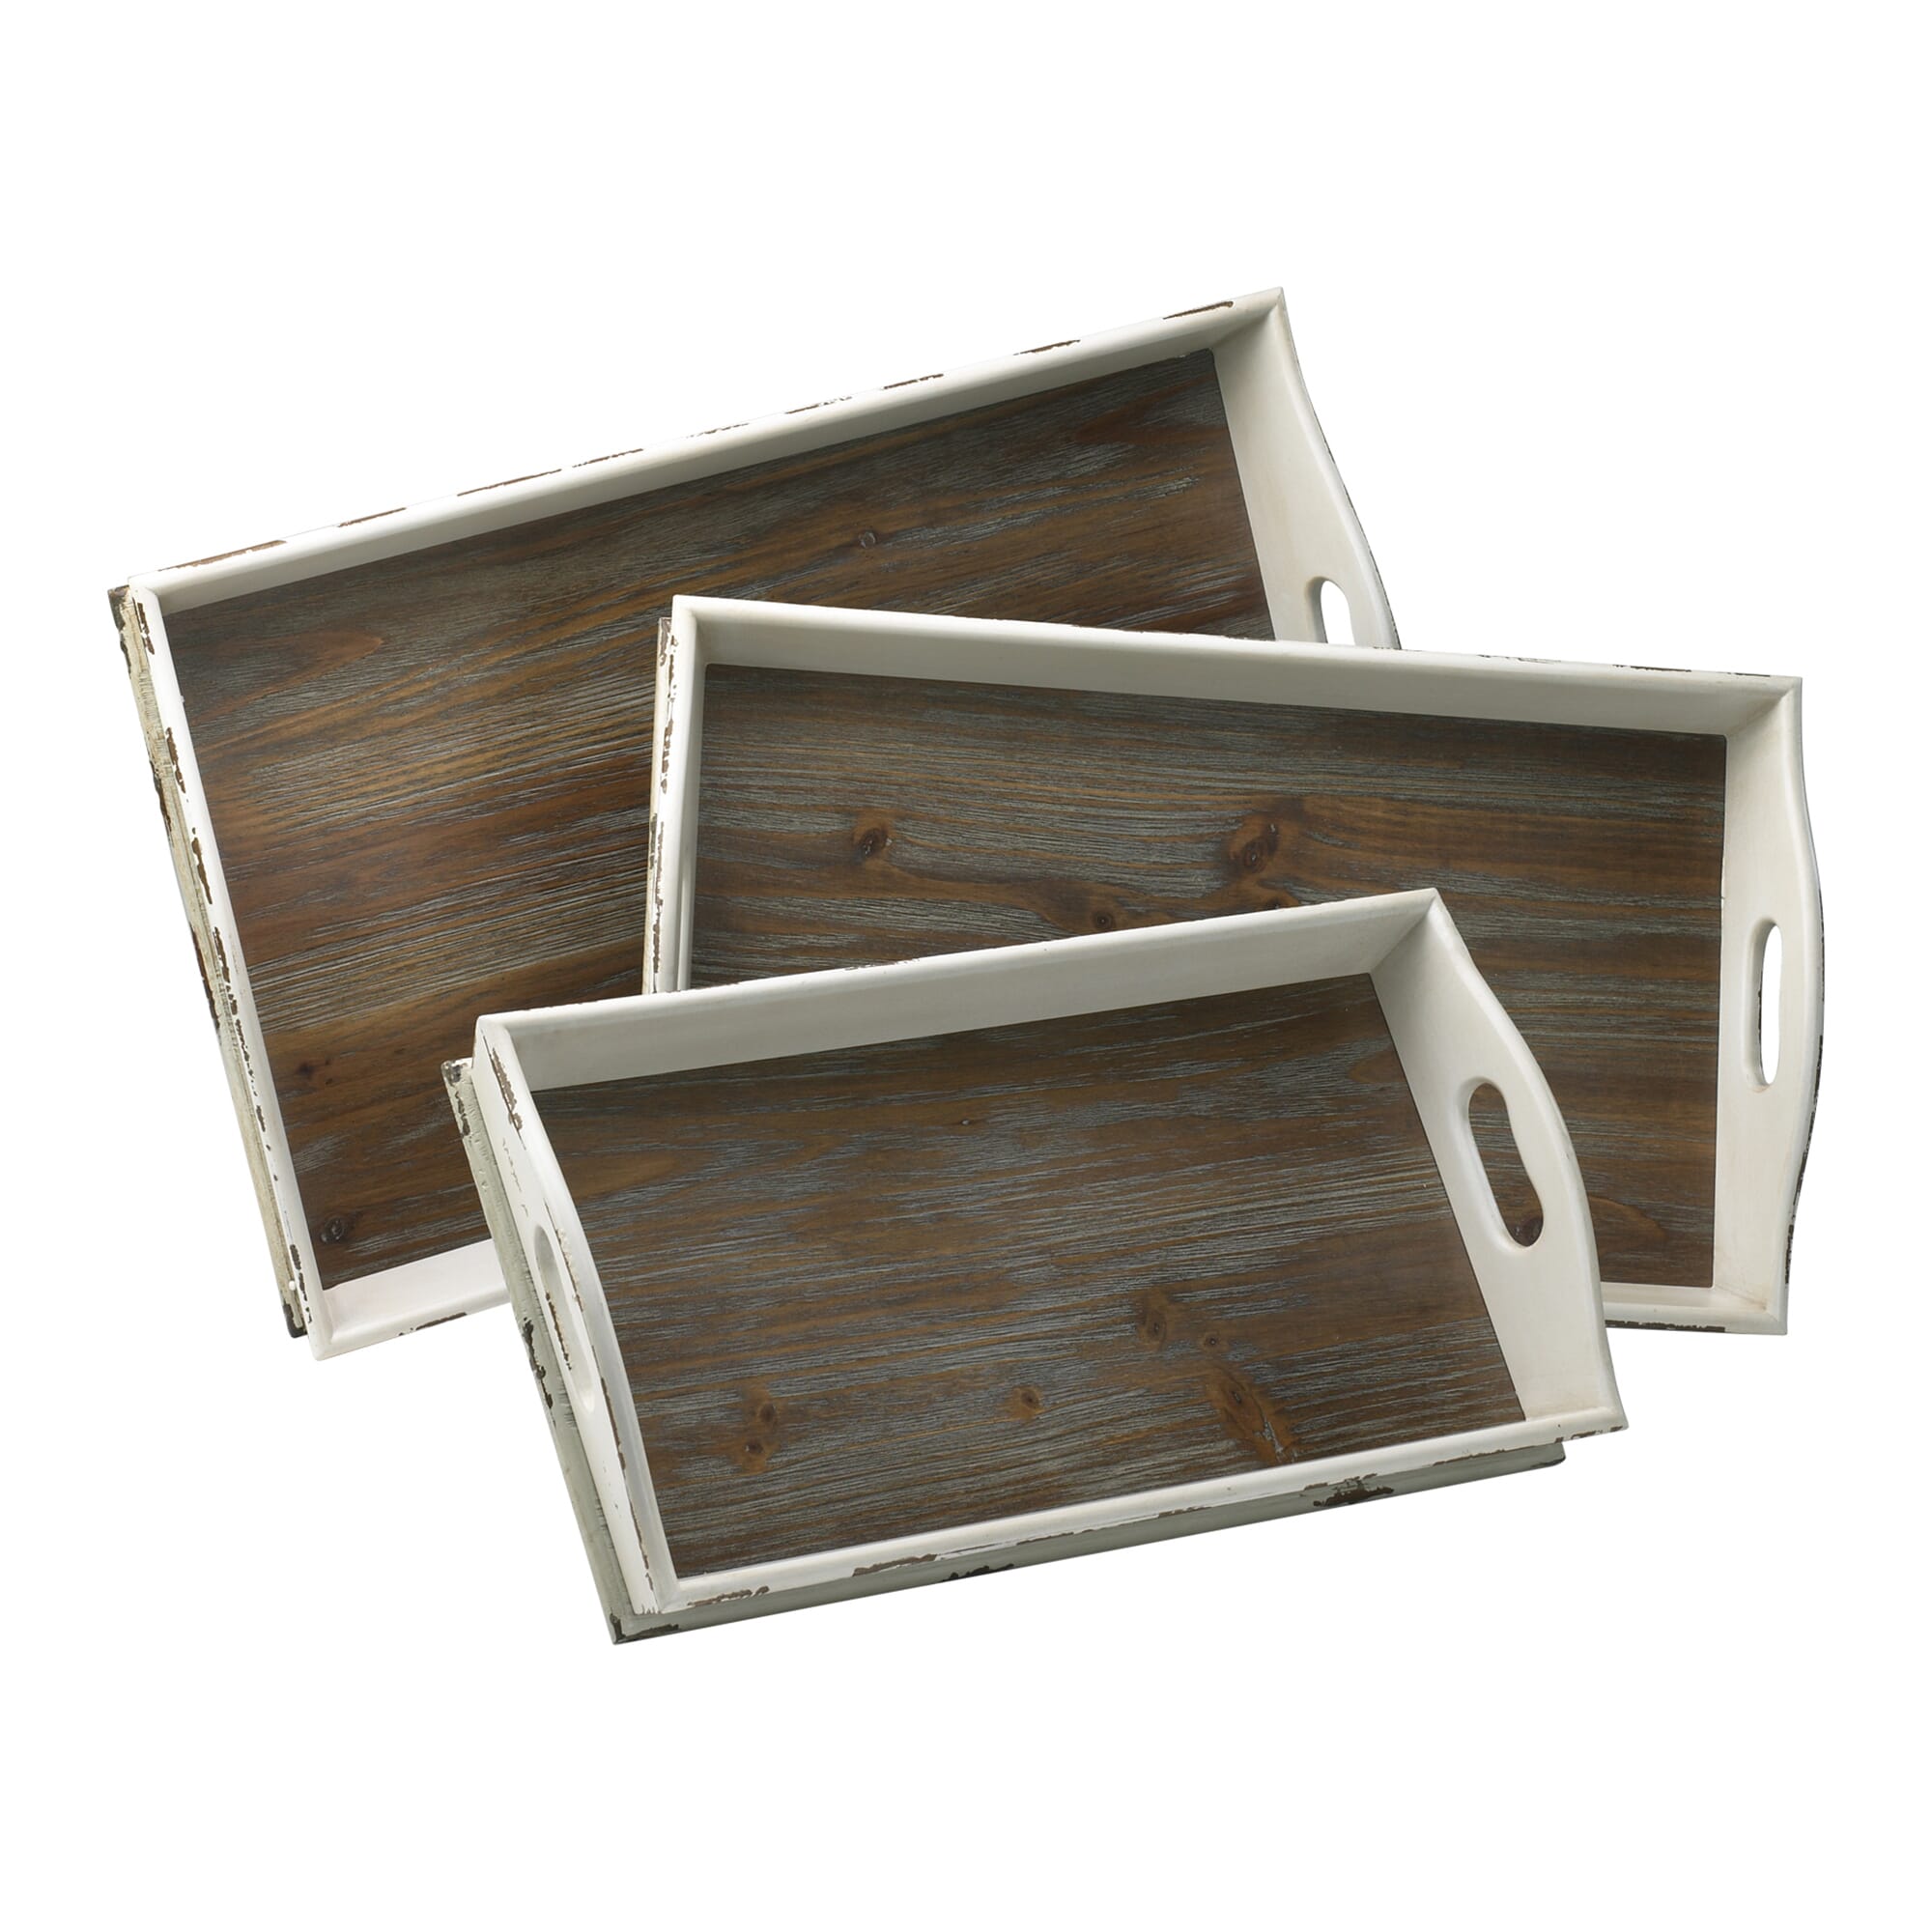 Alder Nesting Trays S/3 in Distressed White And Gray